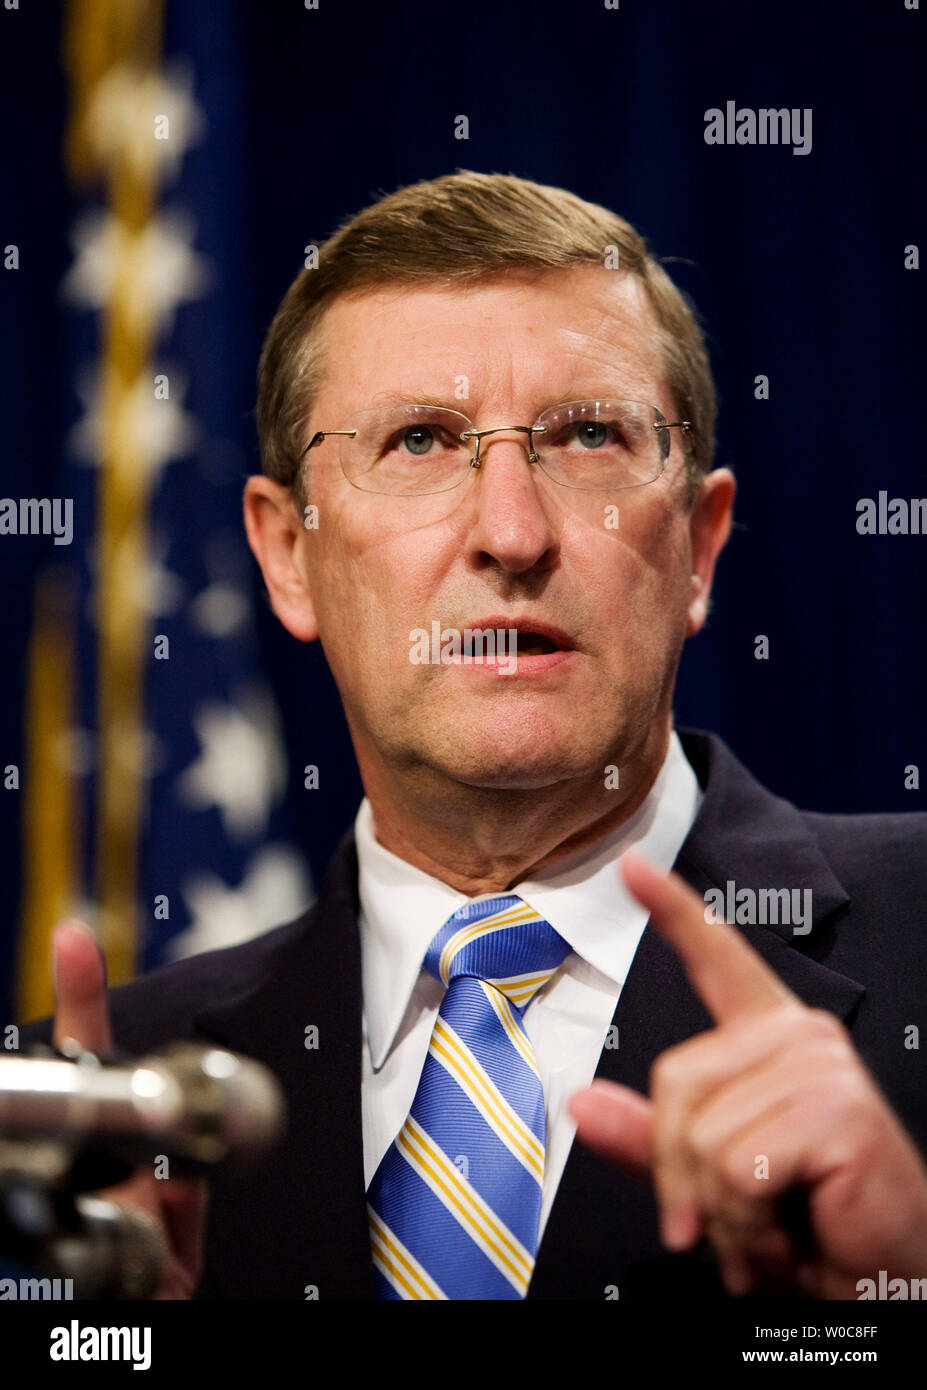 Senate Budget Chairman Kent Conrad, D-ND speaks during a news conference on the new deficit projections in the Office of Management and Budget's fiscal year 2009 mid-year review on Capitol Hill in Washington on July 28, 2008. The federal deficit is projected to be $482 billion for 2009. (UPI Photo/Patrick D. McDermott) Stock Photo